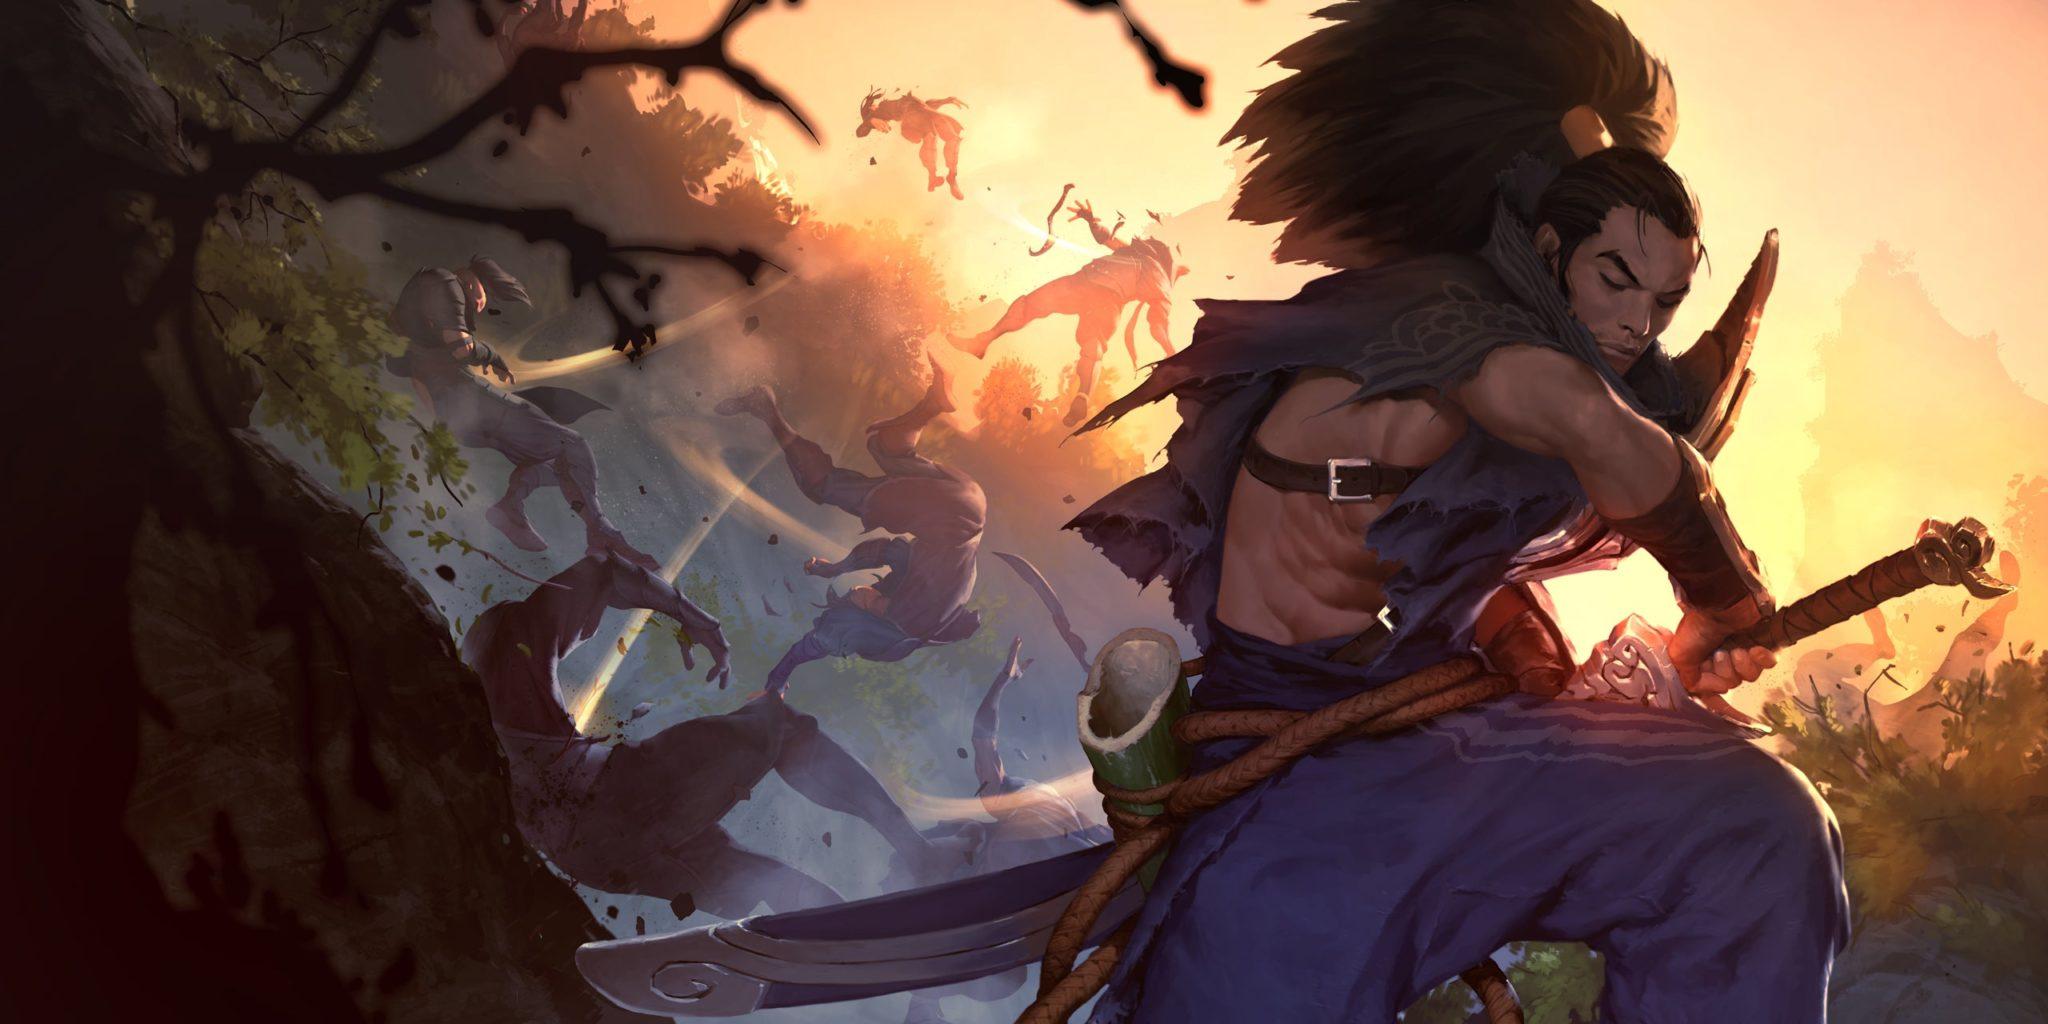 League could be getting Yasuo 2.0 when Yone is released during the Patch 10.15 cycle.